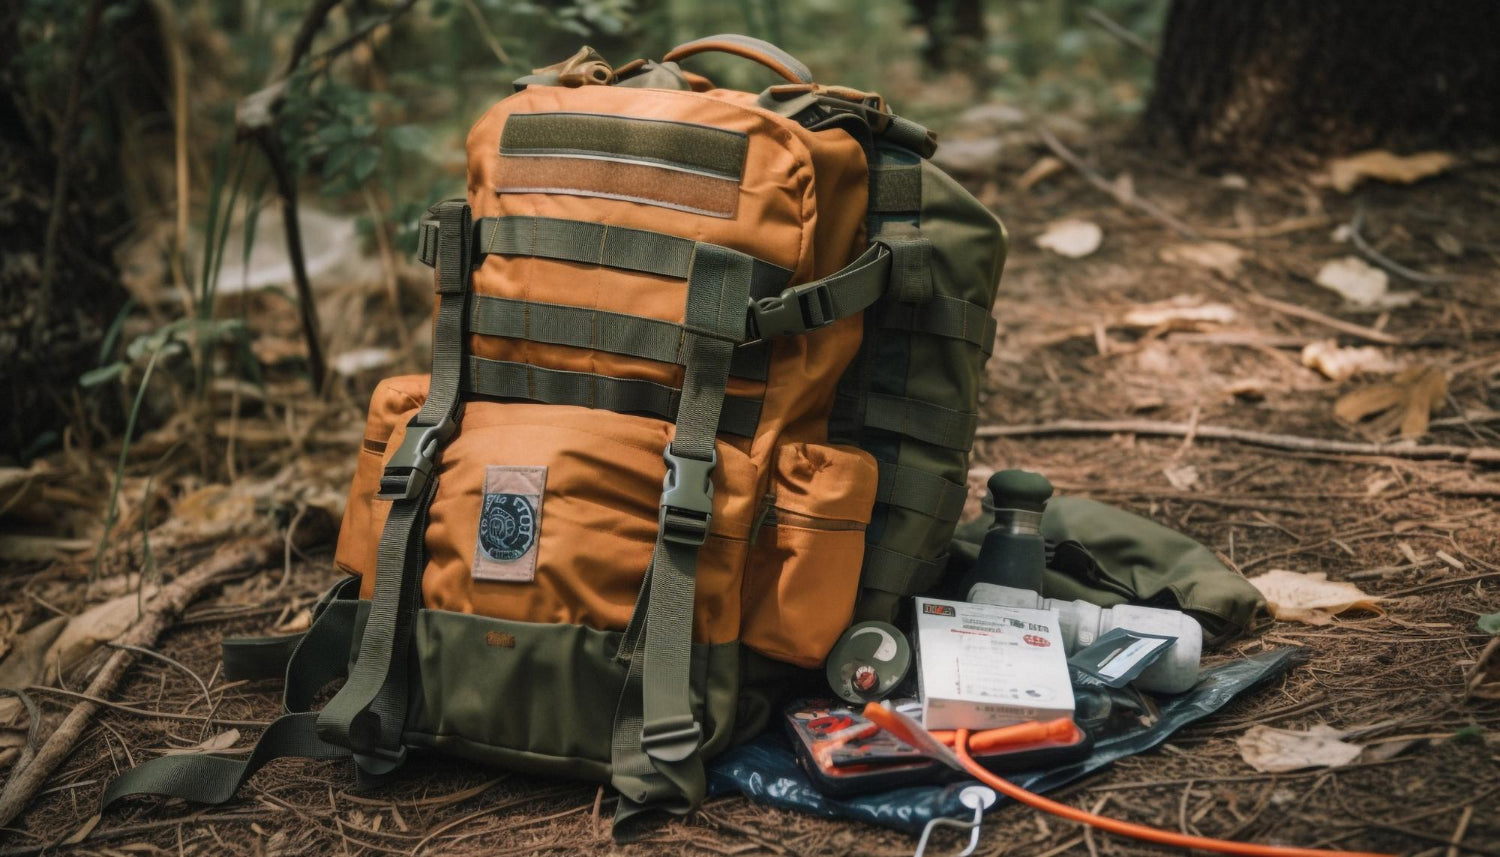 How to build a Survival Kit for Emergencies